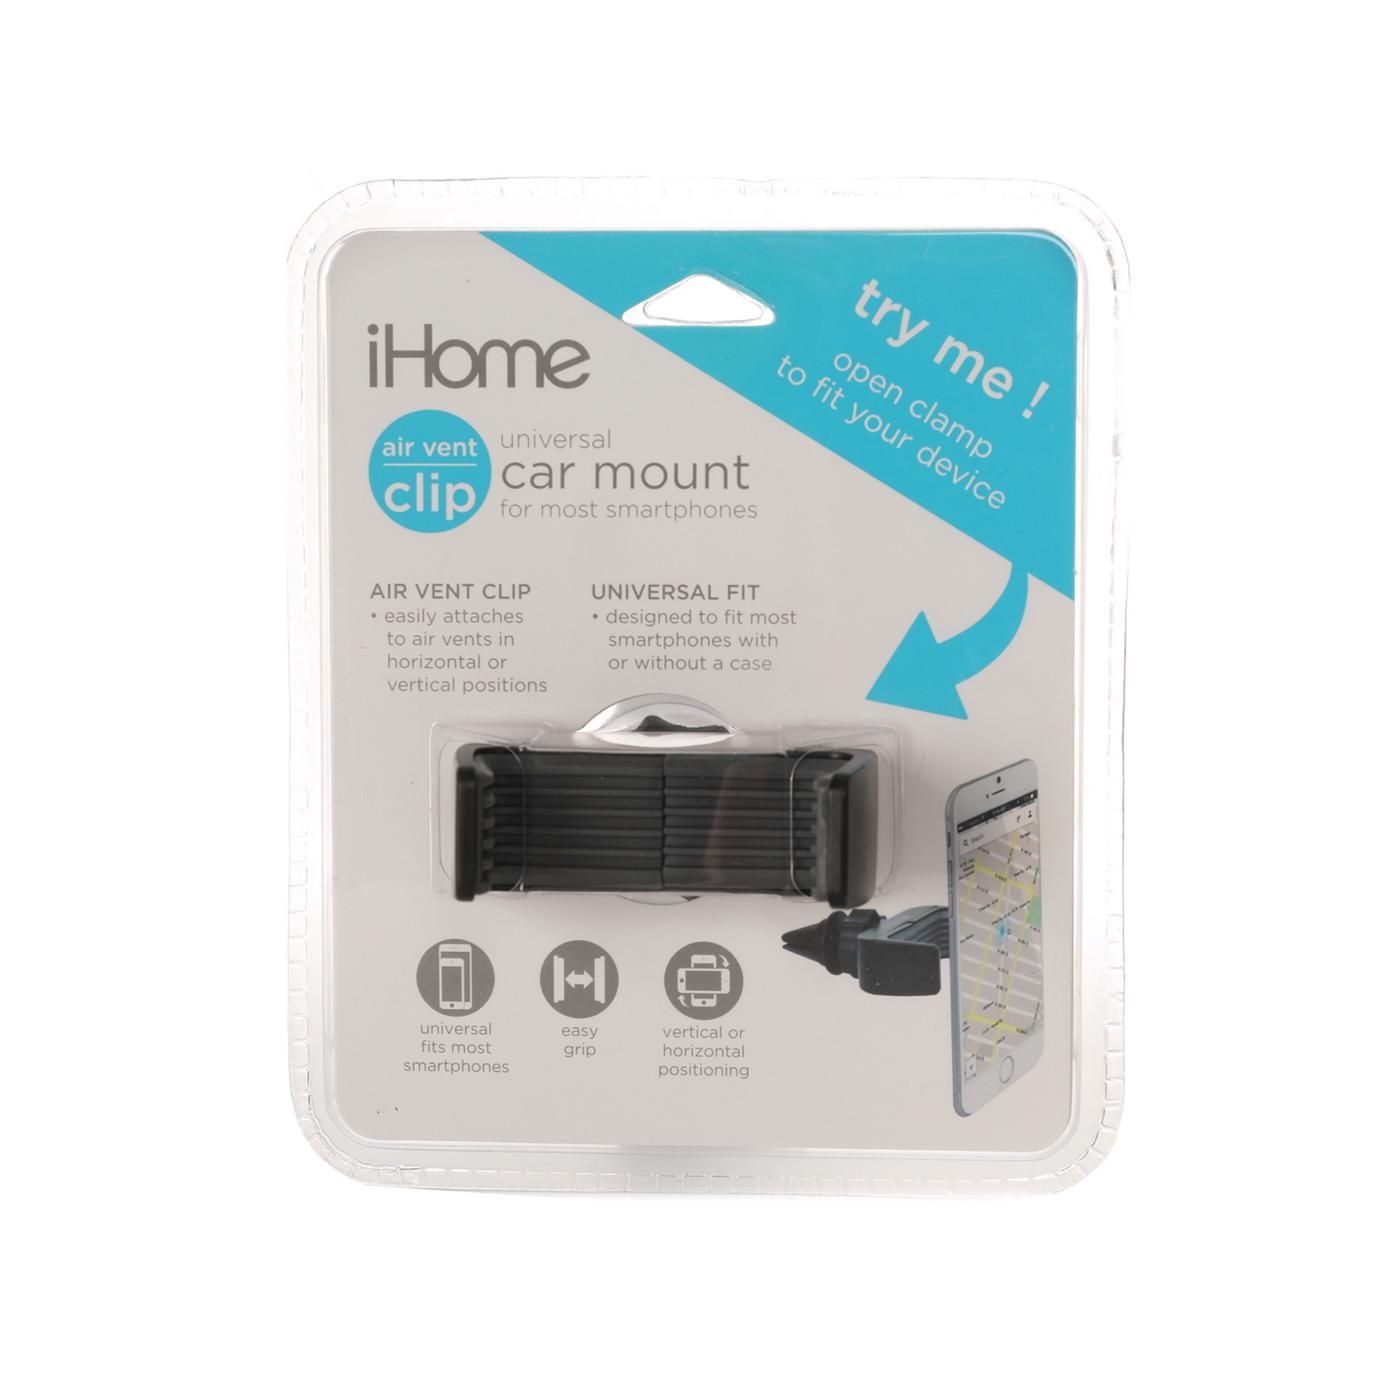 iHome Air Vent Universal Car Mount - Black; image 1 of 2